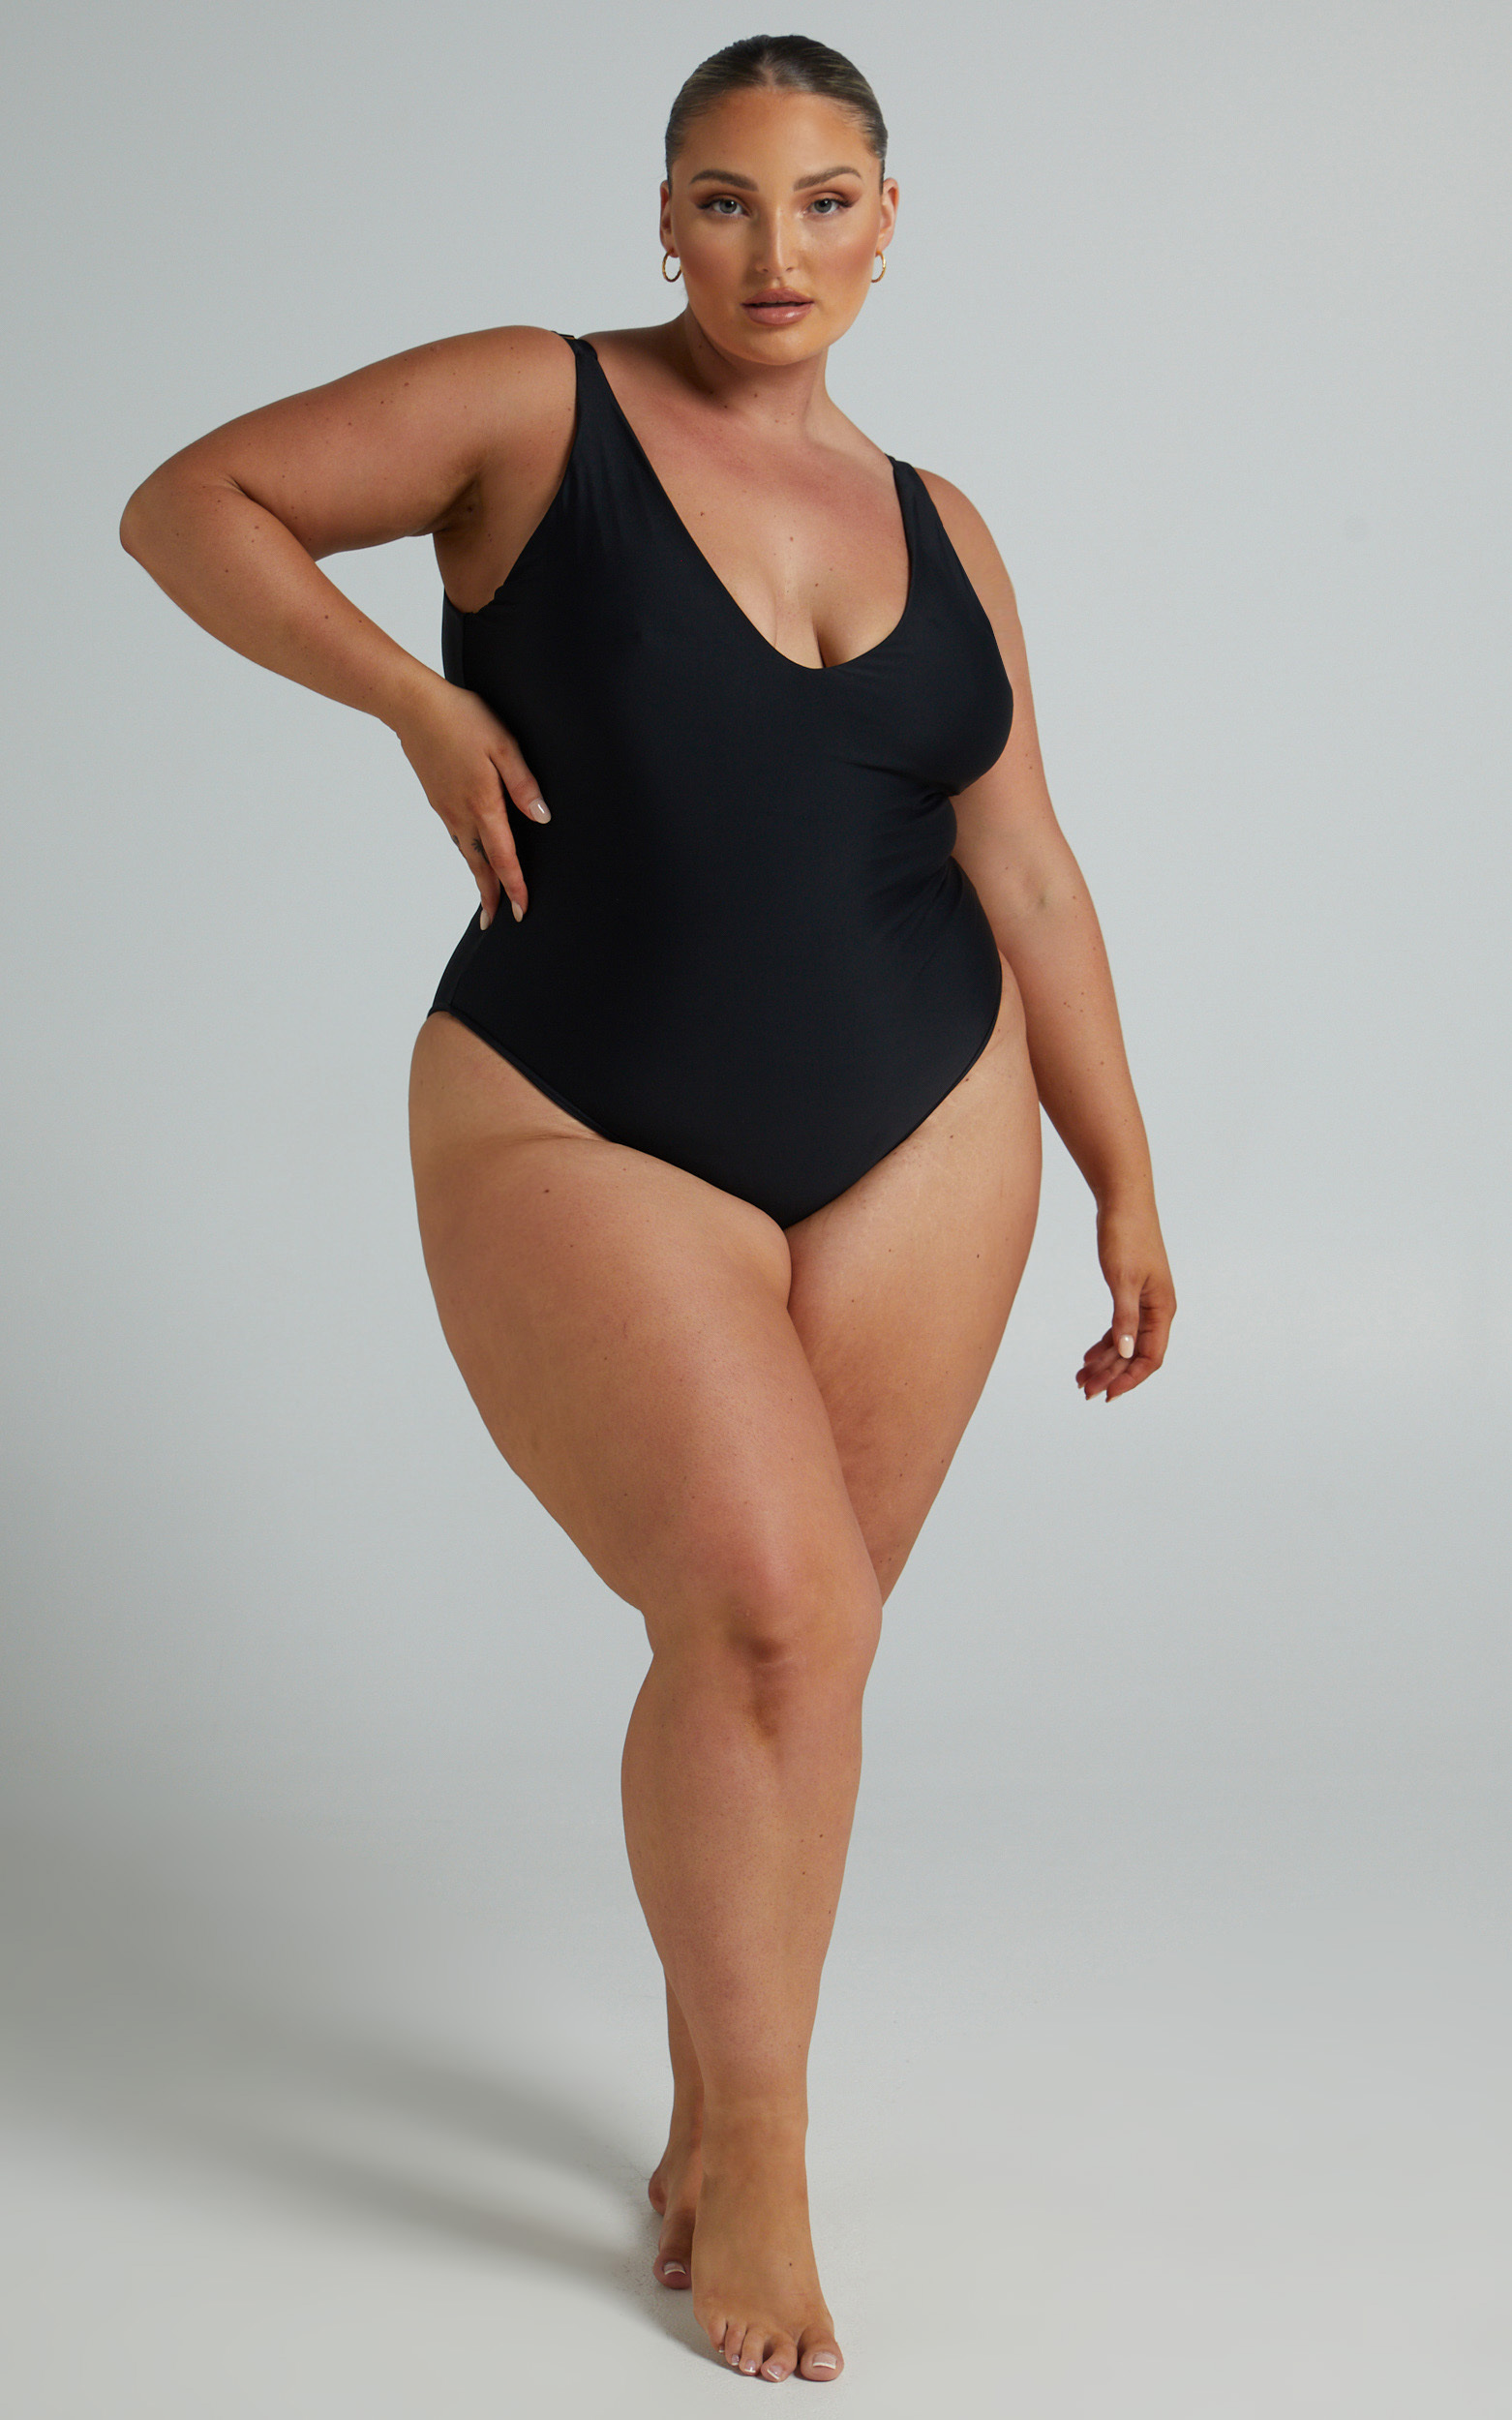 Moselle One Piece s in Recycled Nylon in Black - 04, BLK1, hi-res image number null